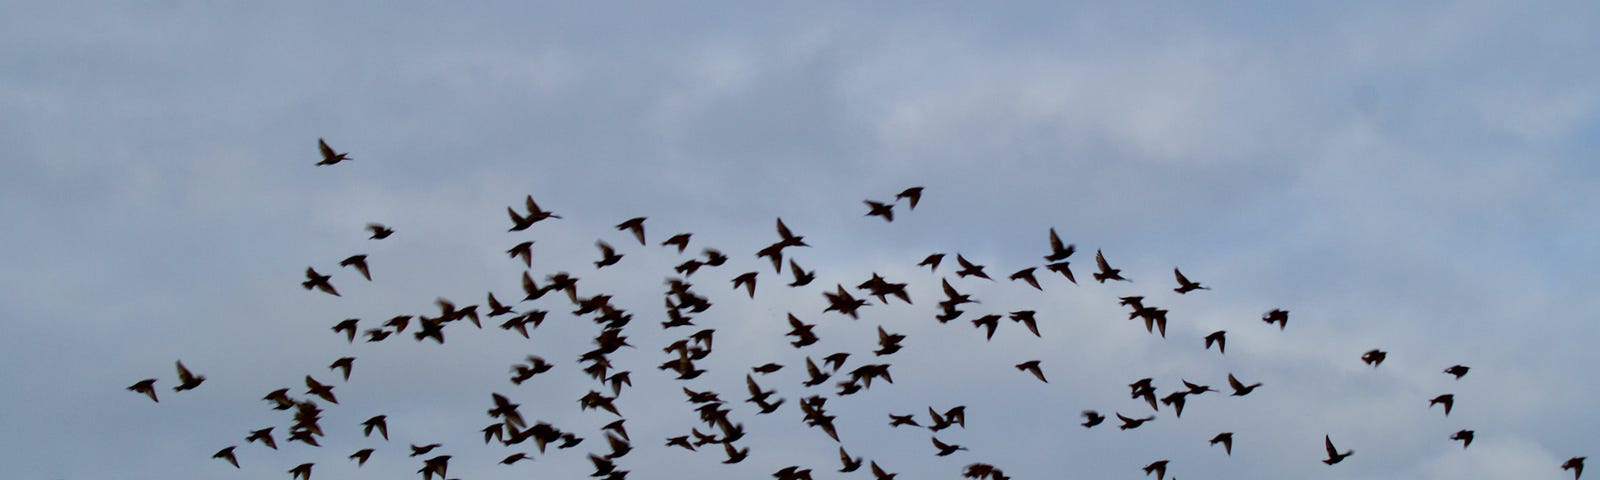 a flock of small birds flying together